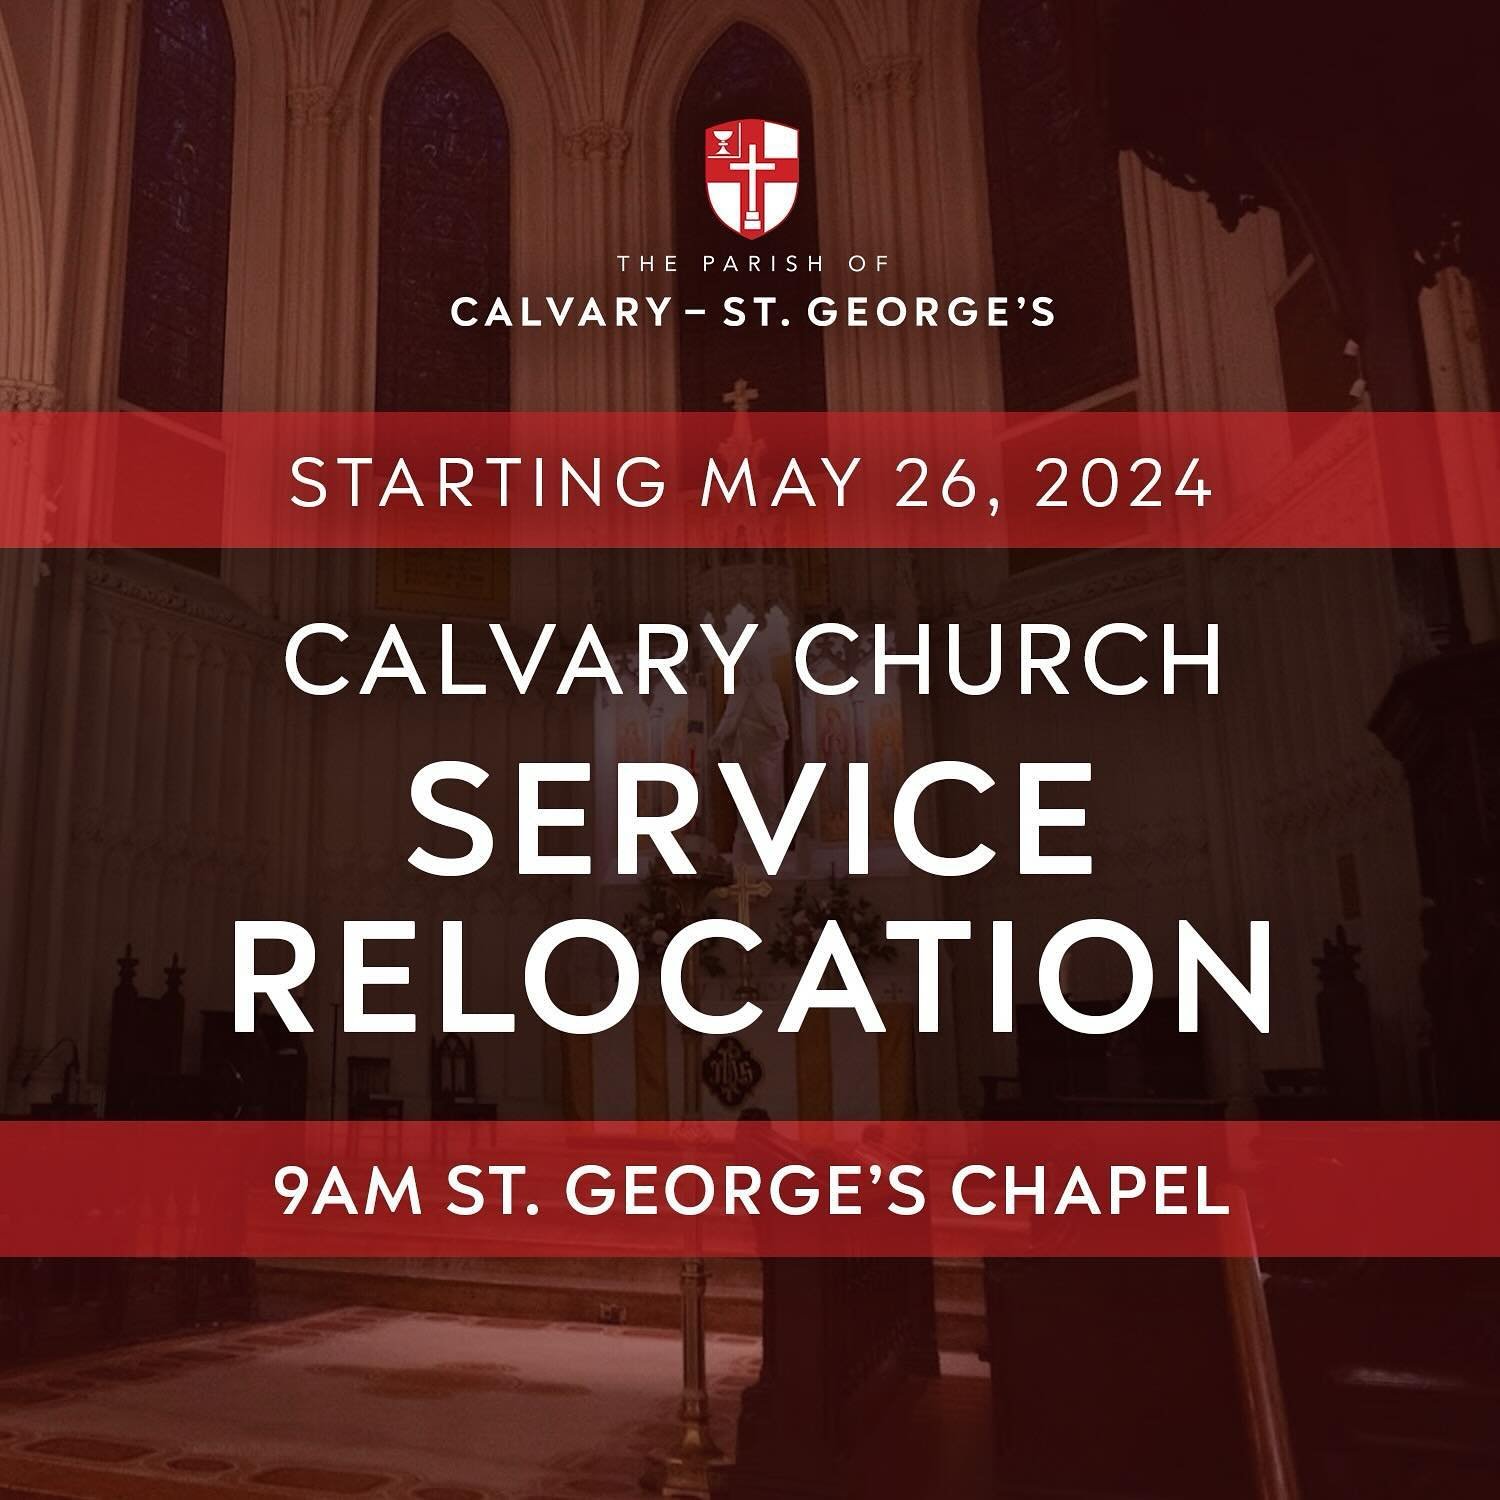 Friendly reminder! Starting May 26 2024, our 10AM service at Calvary Church will be relocated to St. George&rsquo;s Chapel at 7 Rutherford Place and will begin at 9AM.  We look forward to a bright, new chapter at Calvary-St. George&rsquo;s as we reno